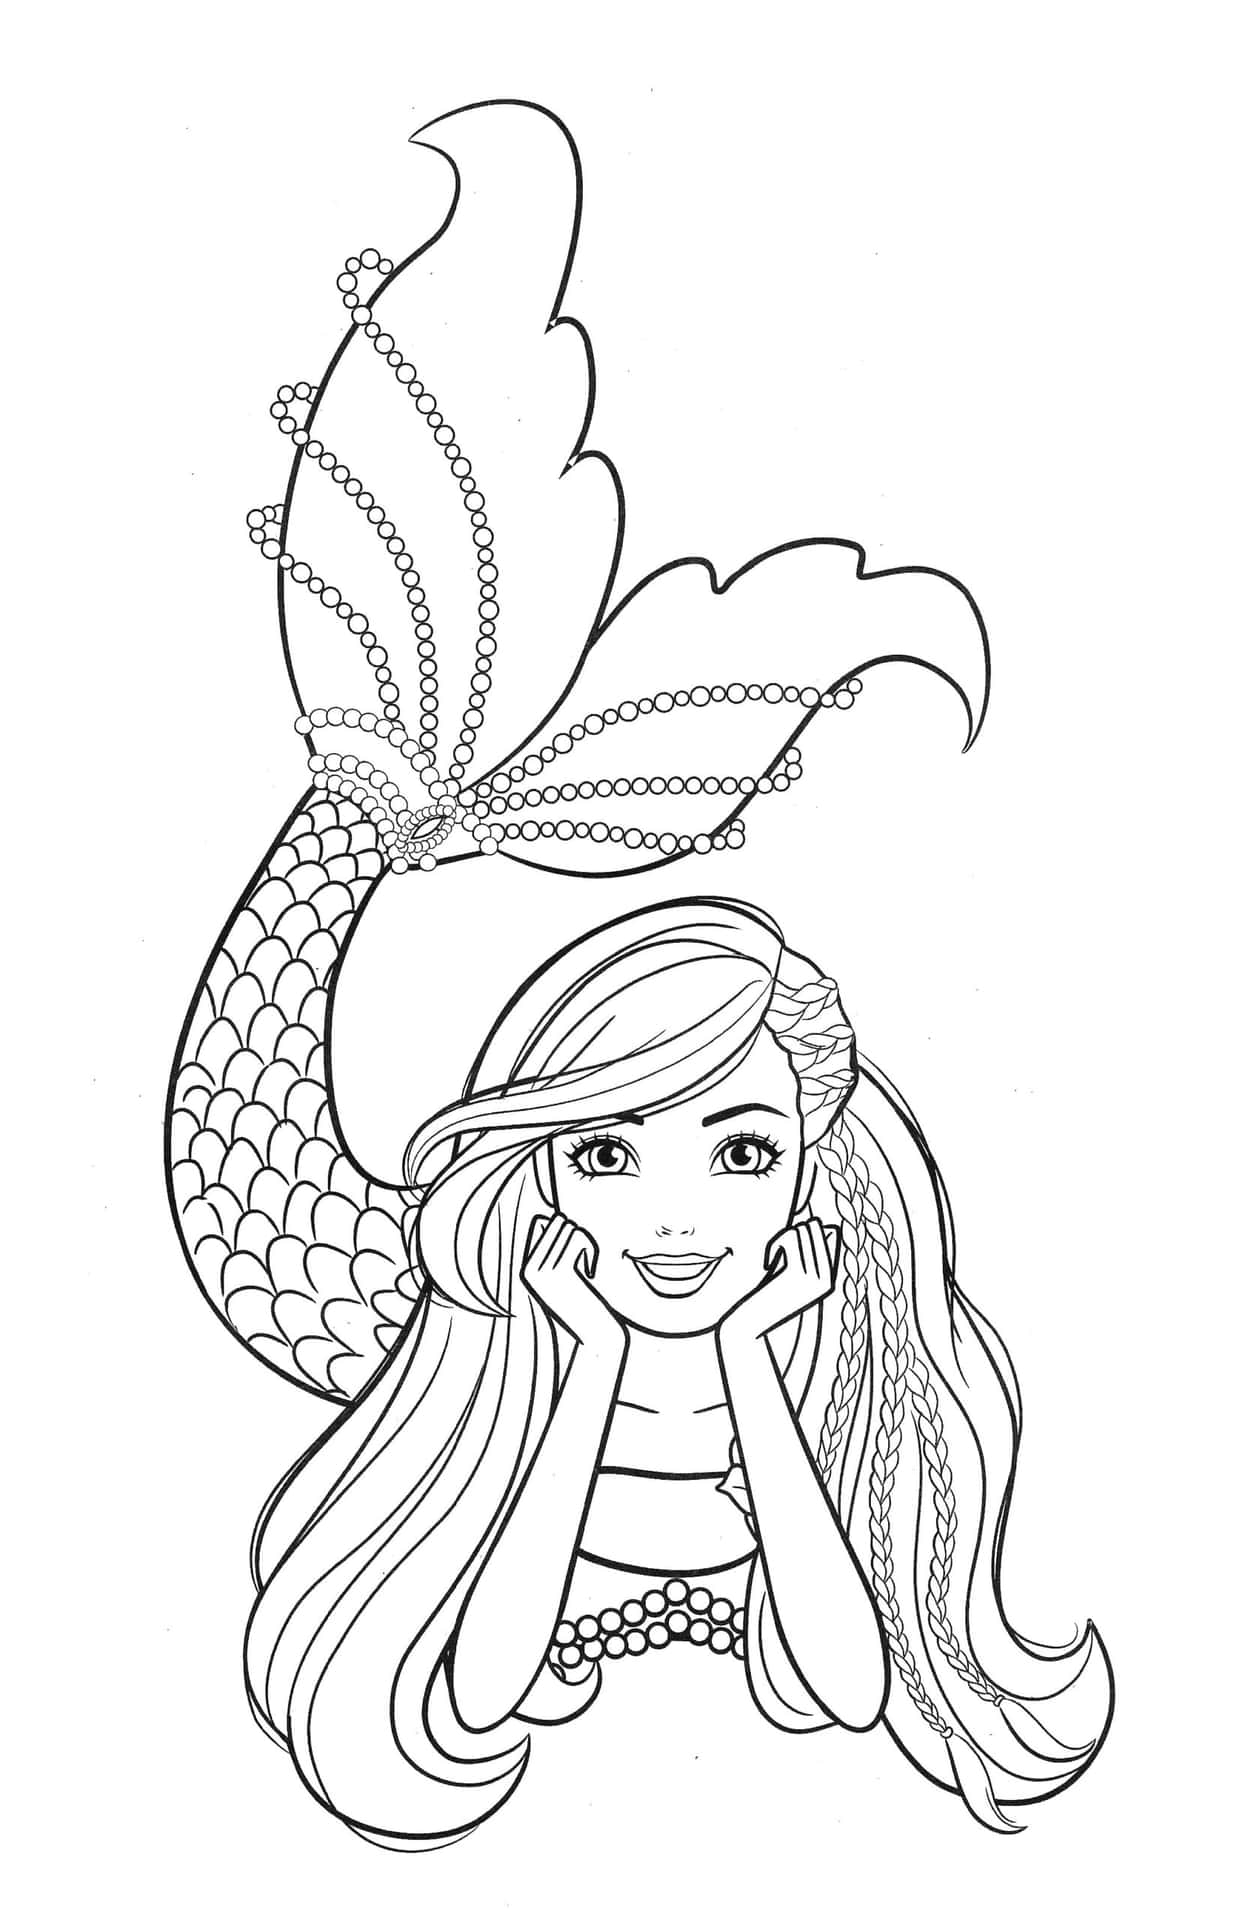 A Mermaid Coloring Page With A Mermaid Tail